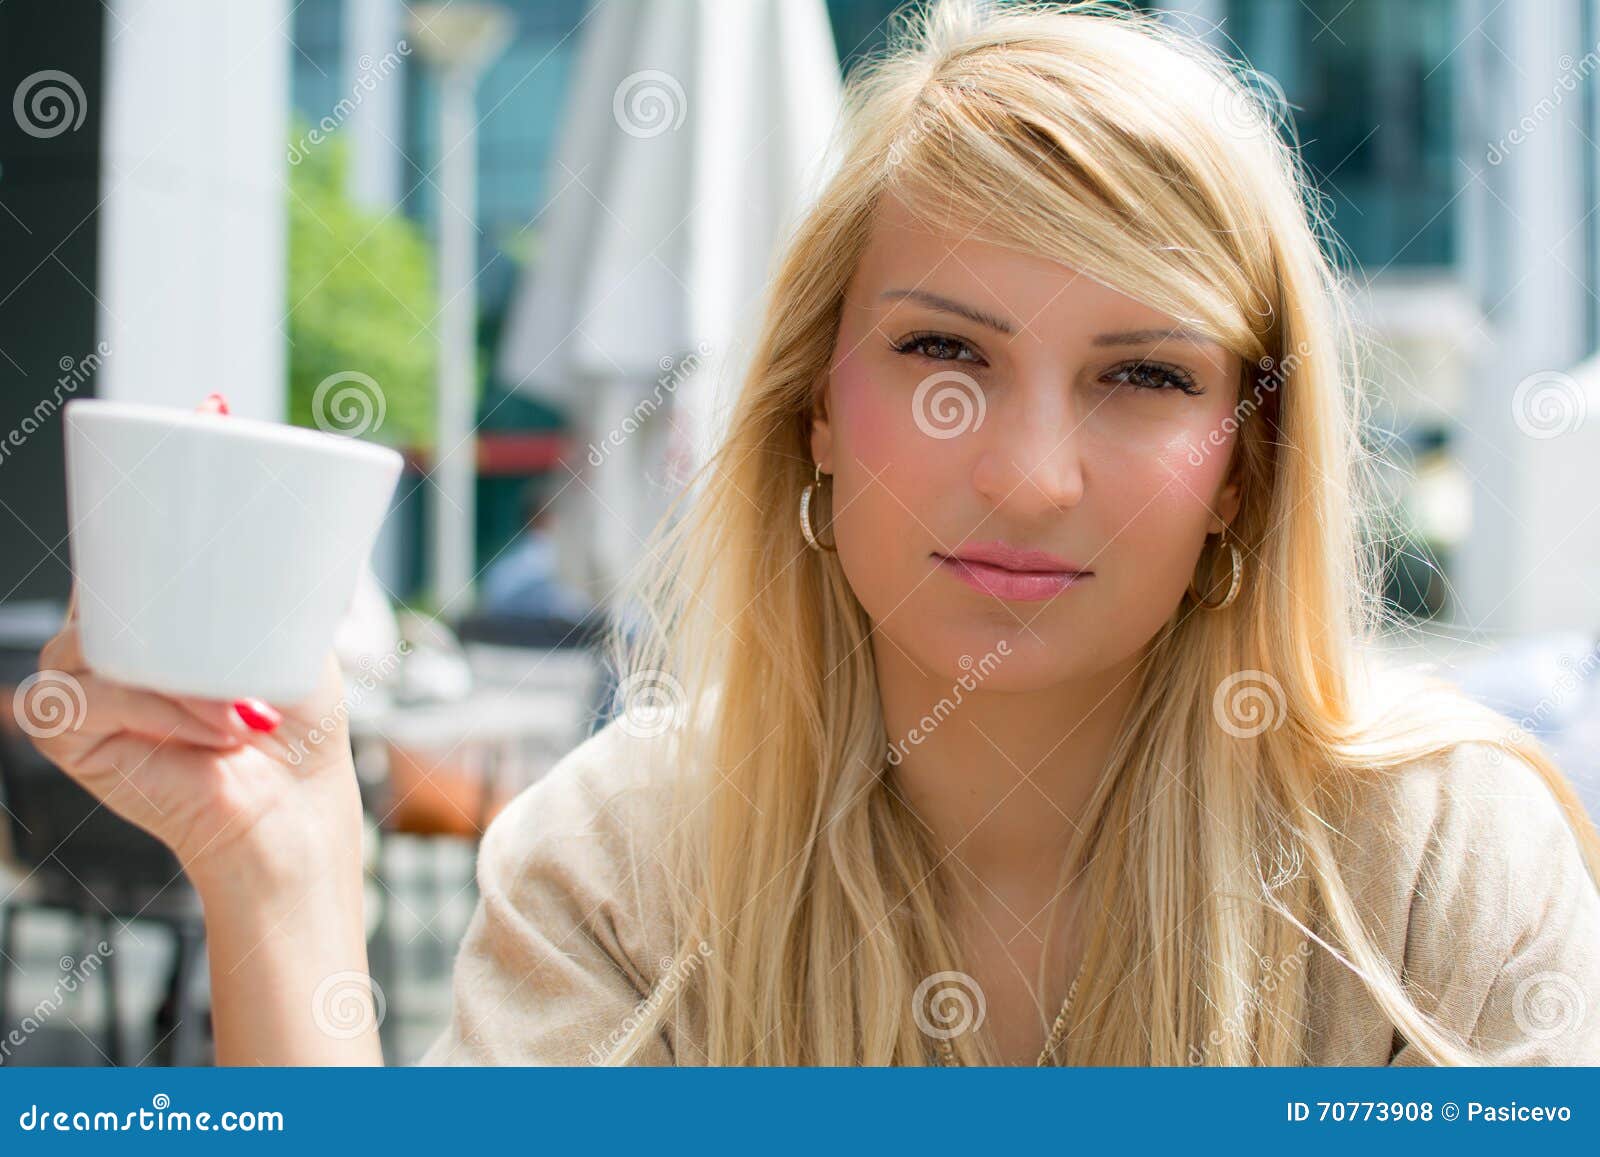 Beautiful Girl With Long Blonde Hair Drinking Coffee Stock Photo